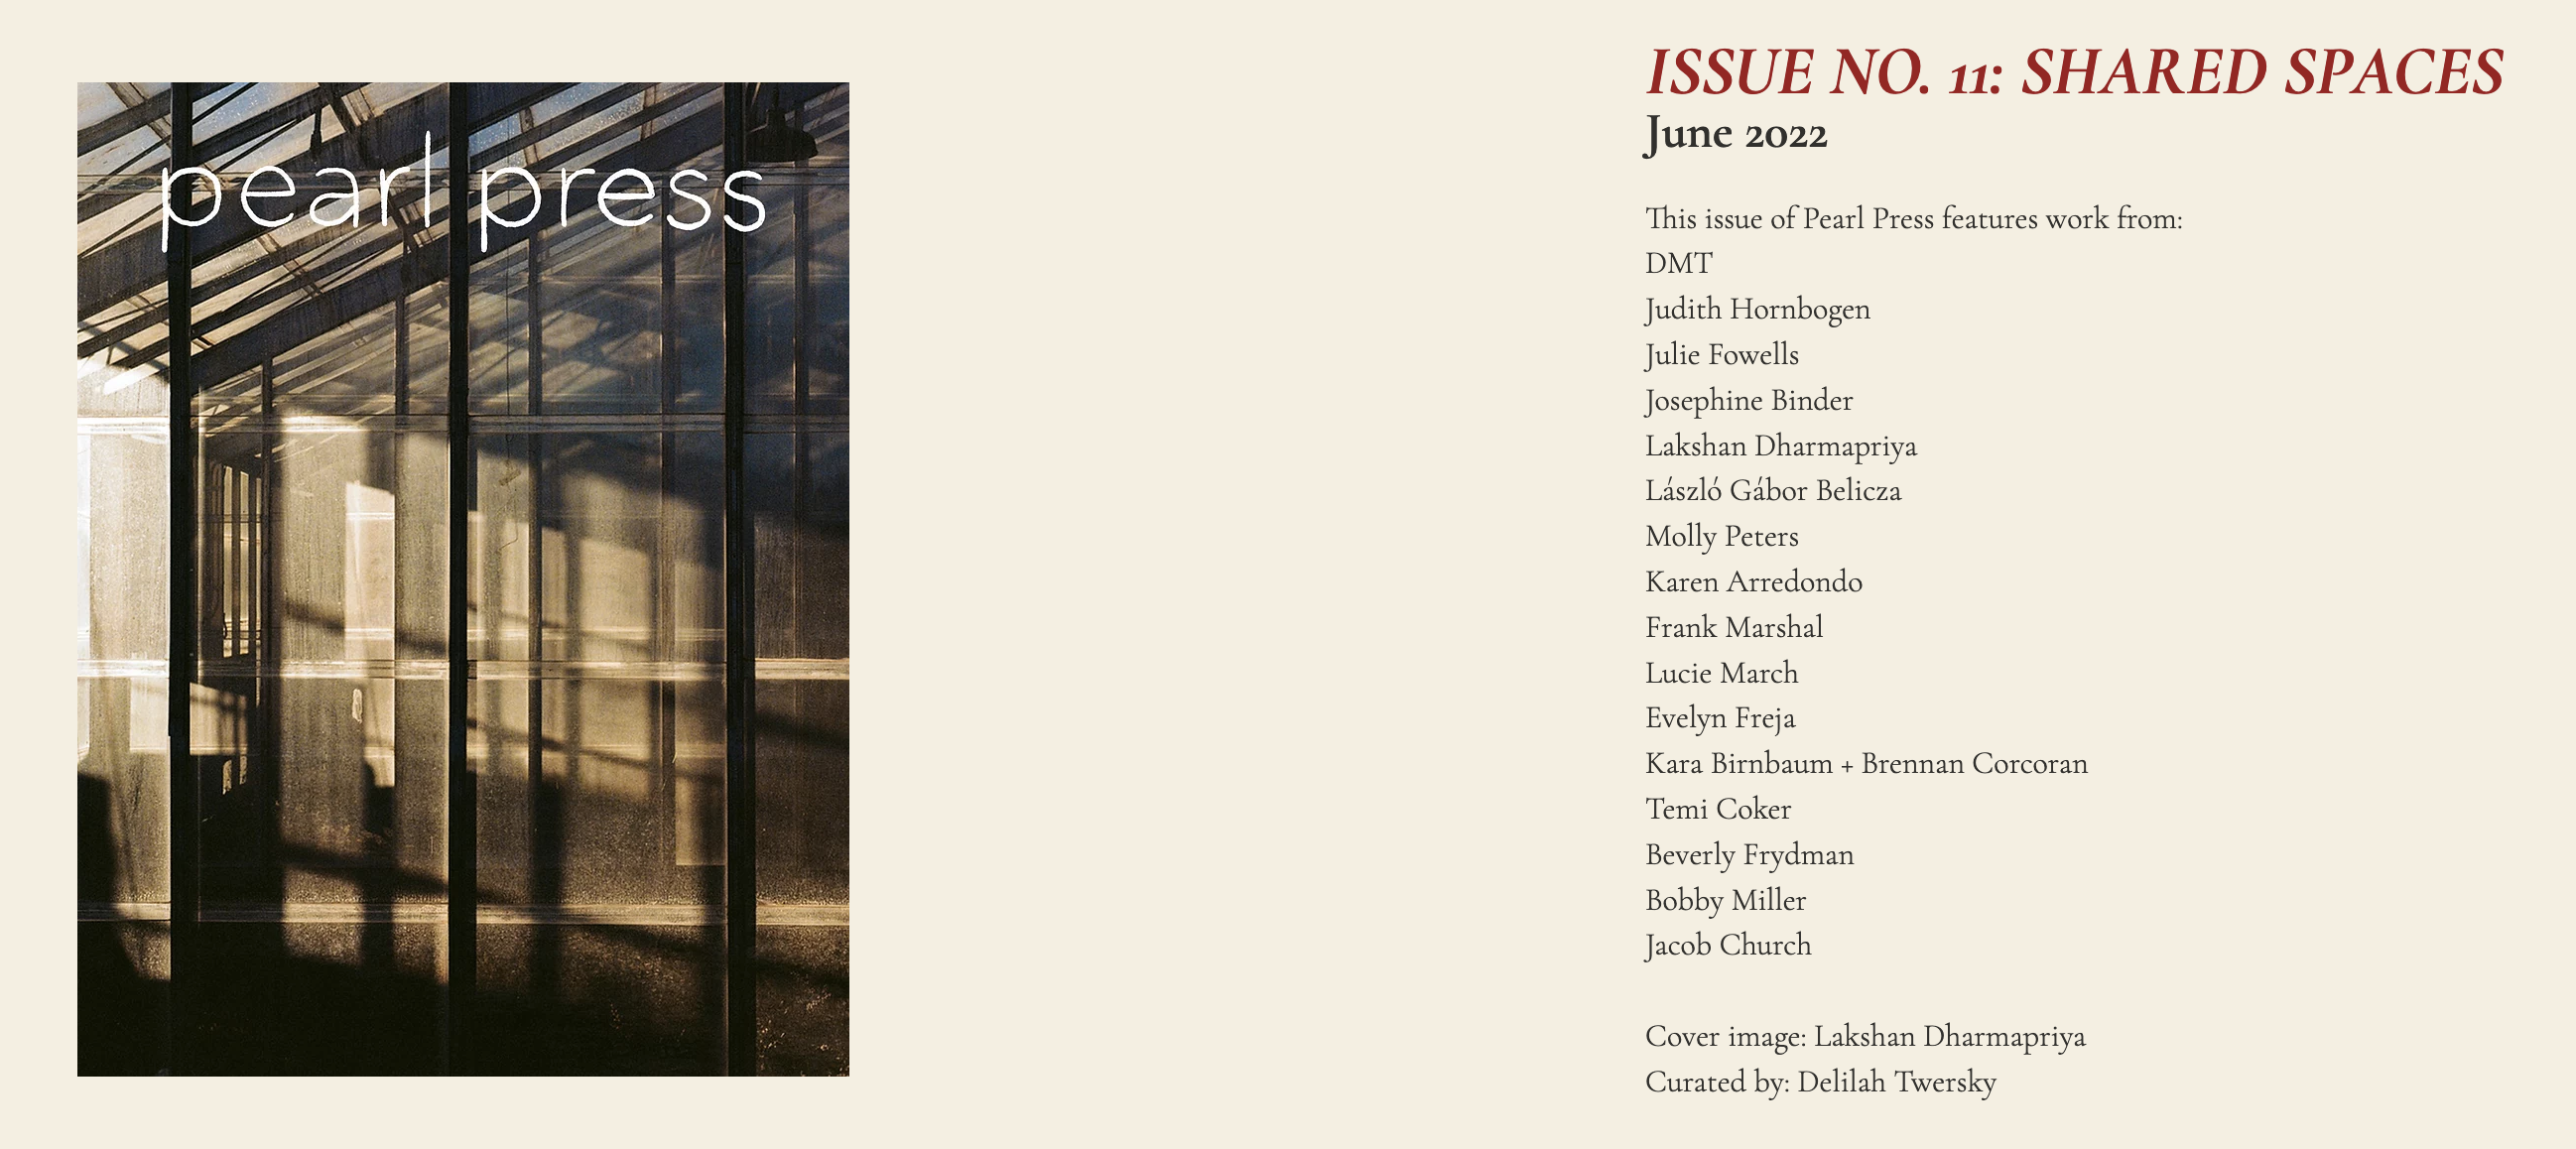 Thumbnail of "Shared Spaces" - Pearl Press issue #11